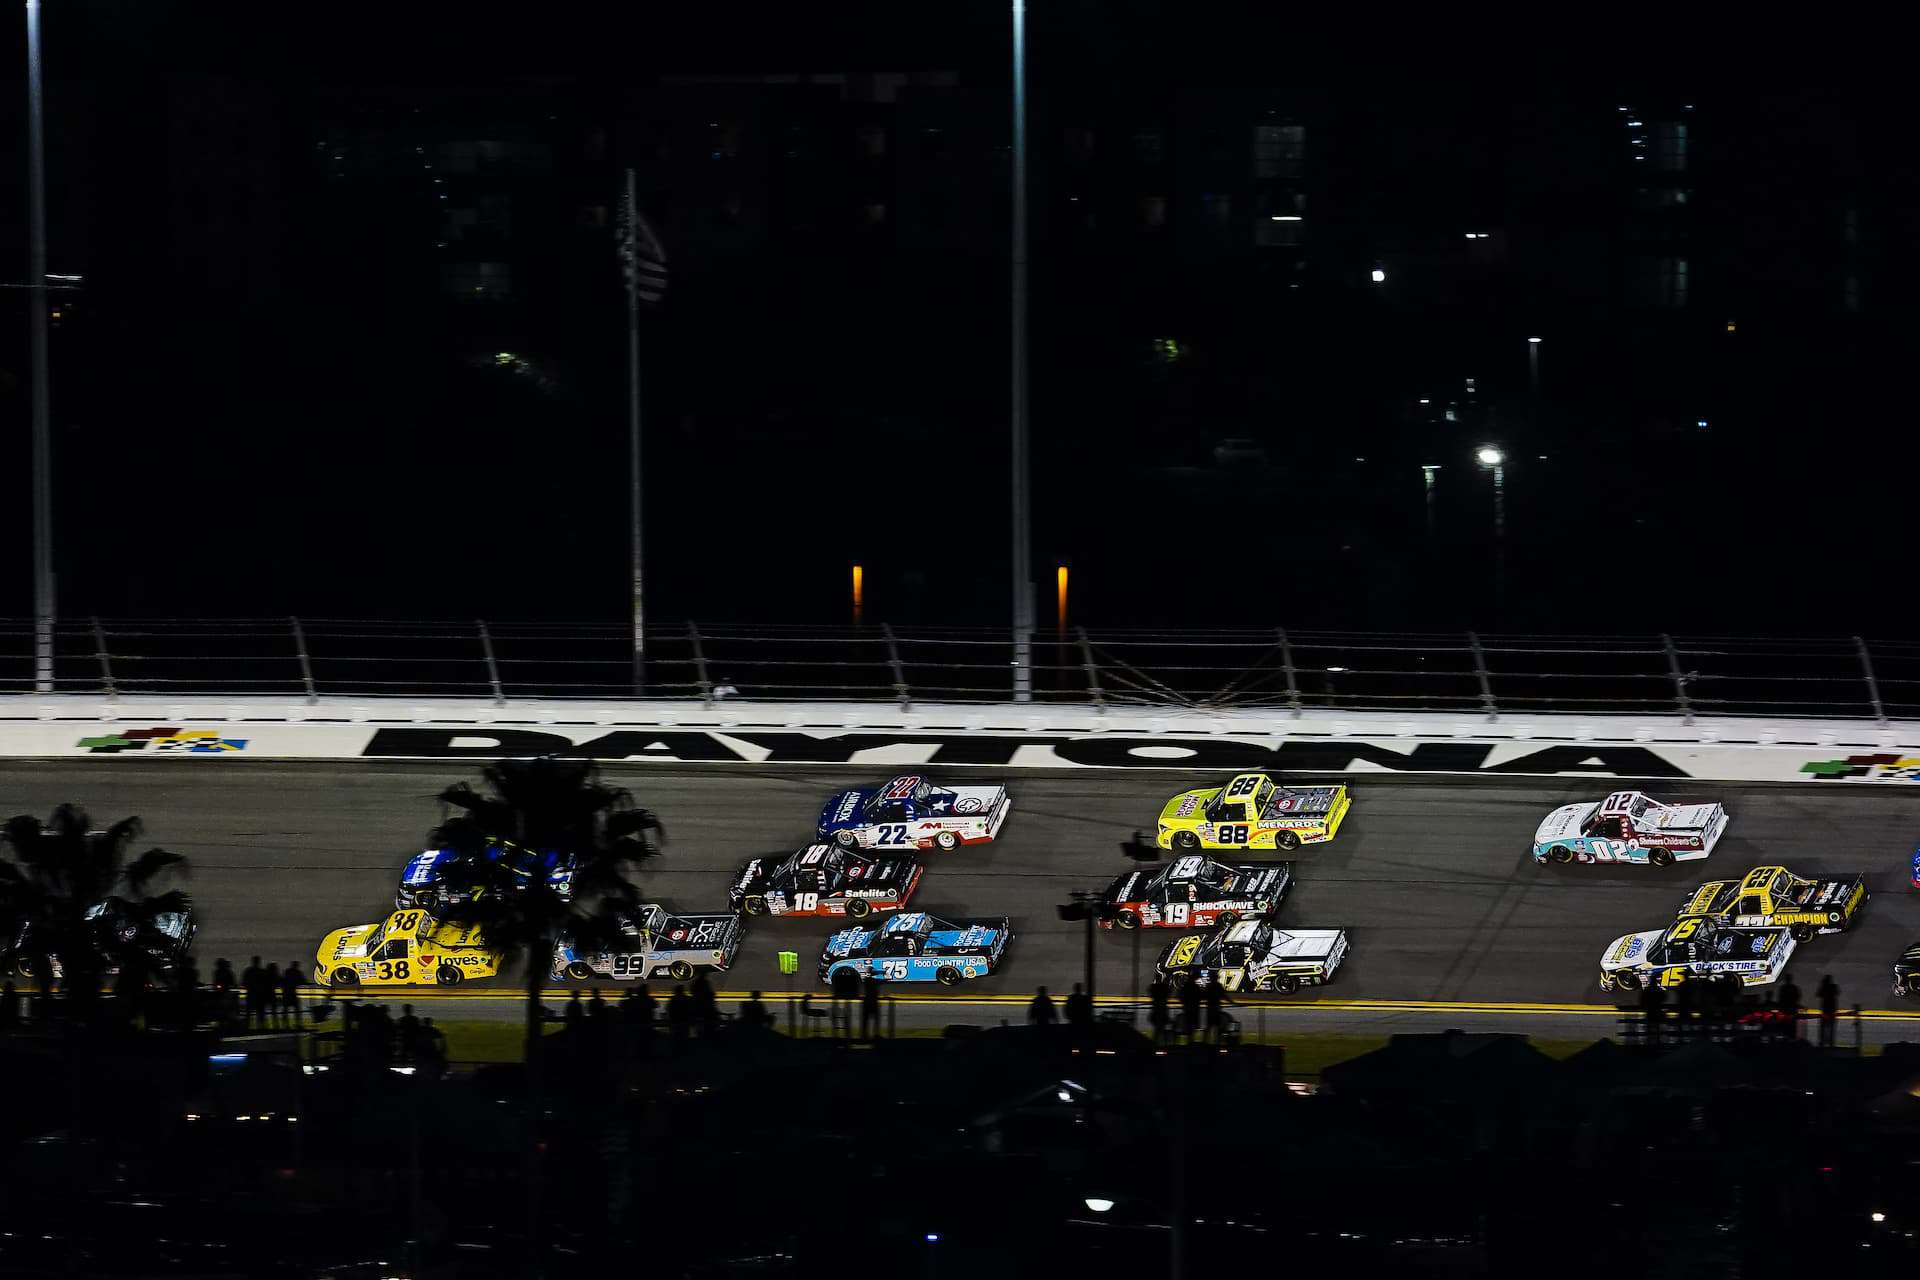 AM Racing starts off the 2022 Camping World Truck Series season with a top-15 at Daytona International Speedway in the NextEra Energy Resources 250.